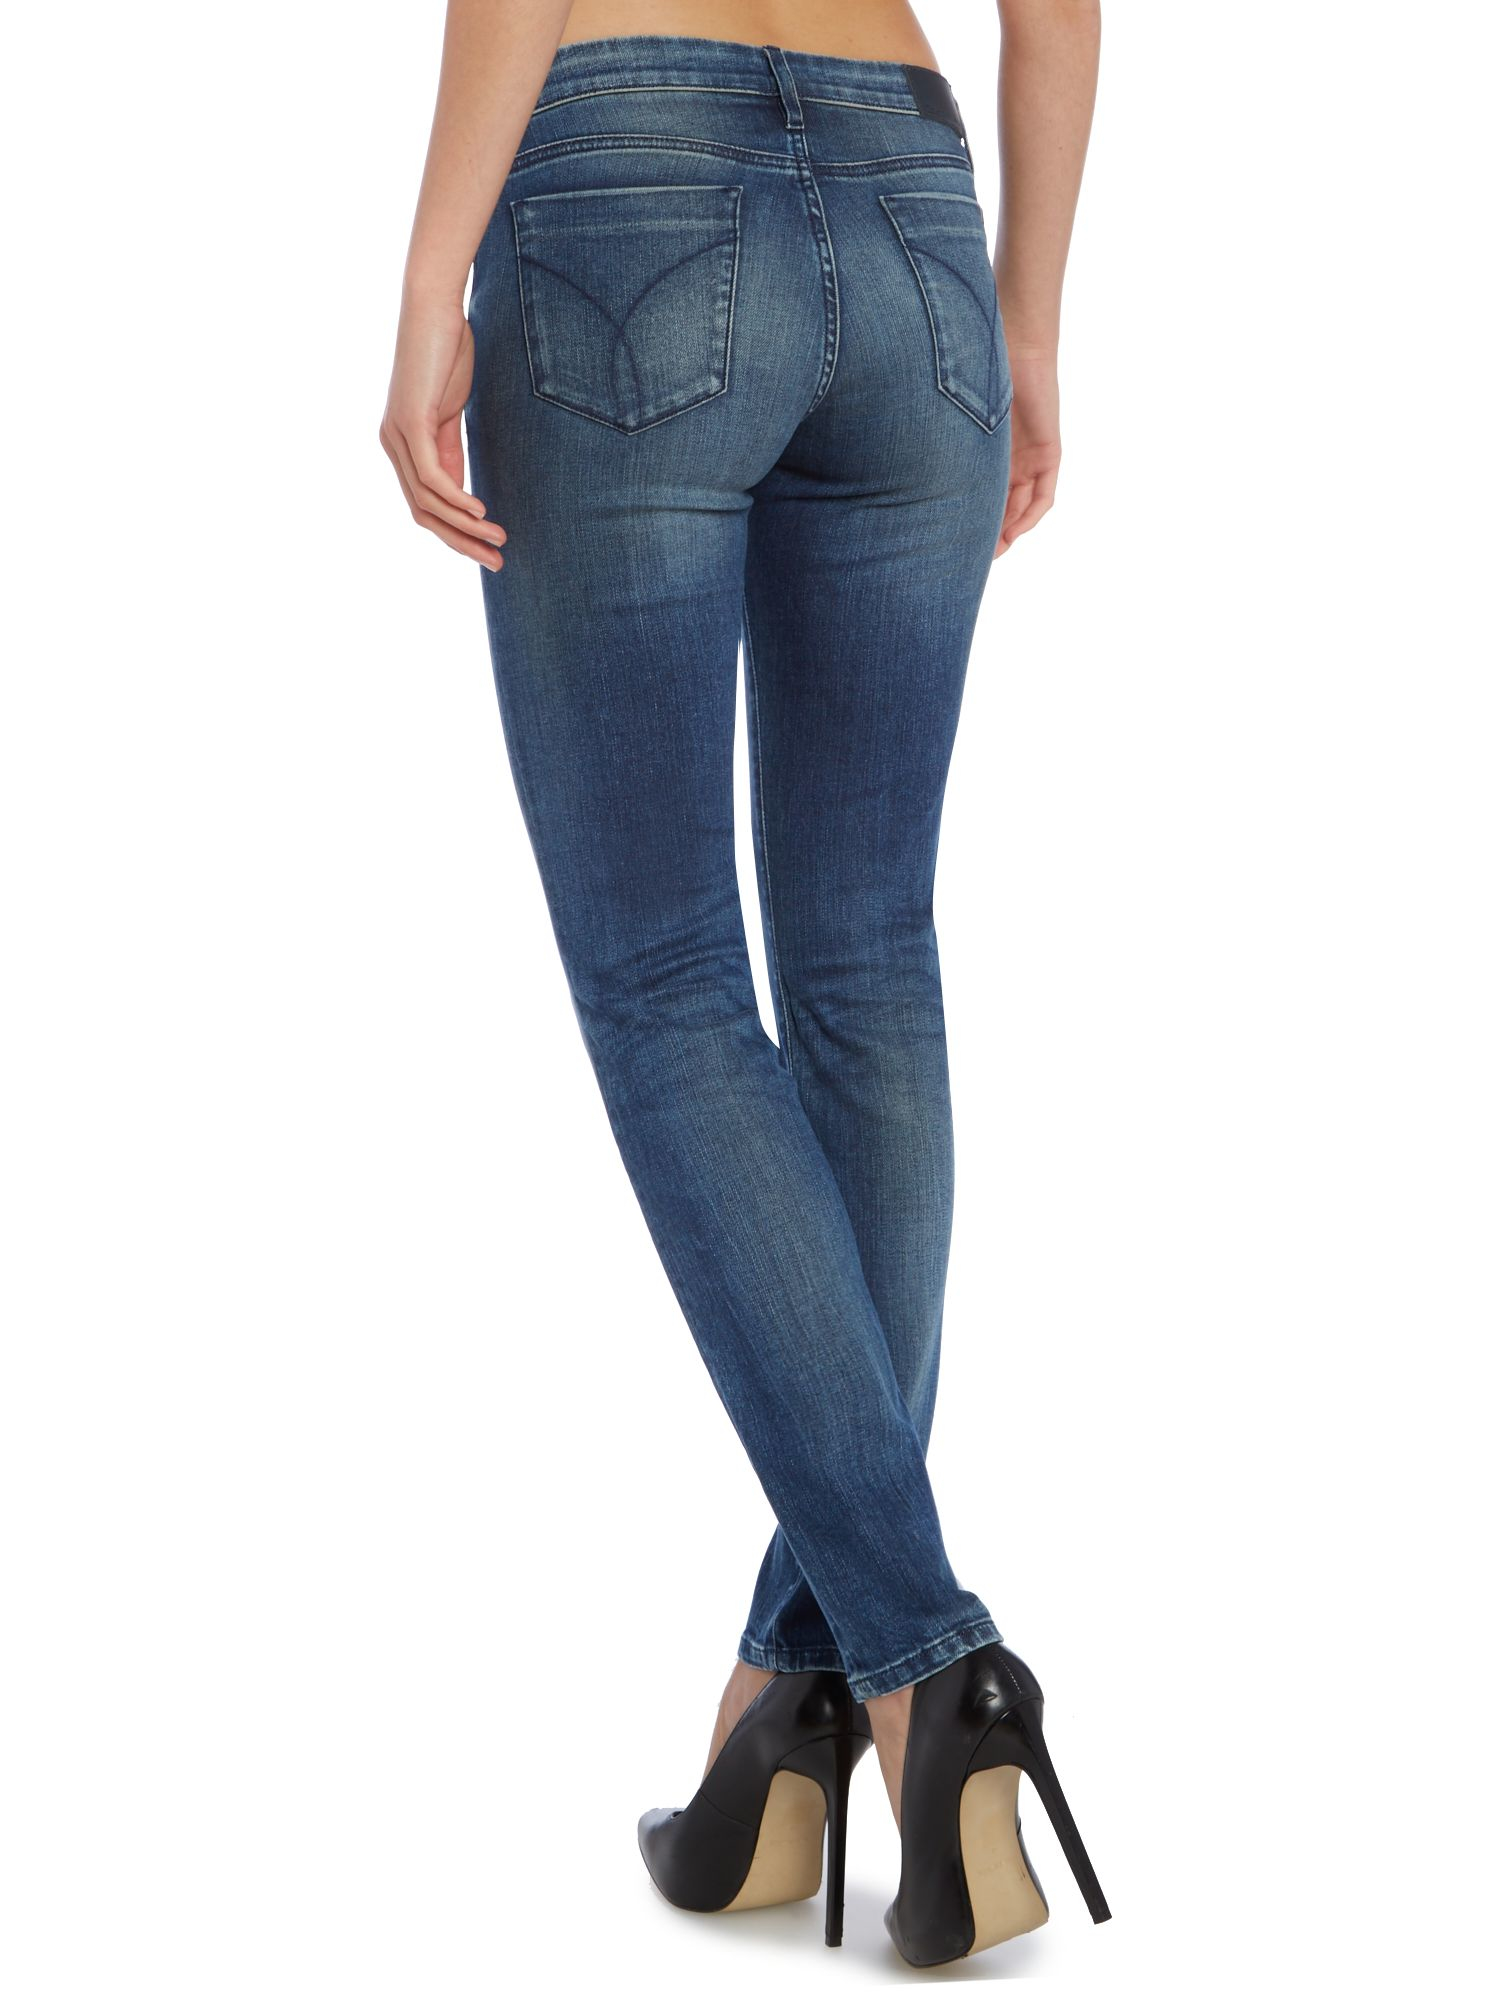 Calvin klein skinny jeans mid rise jeans How to dress women's business casual